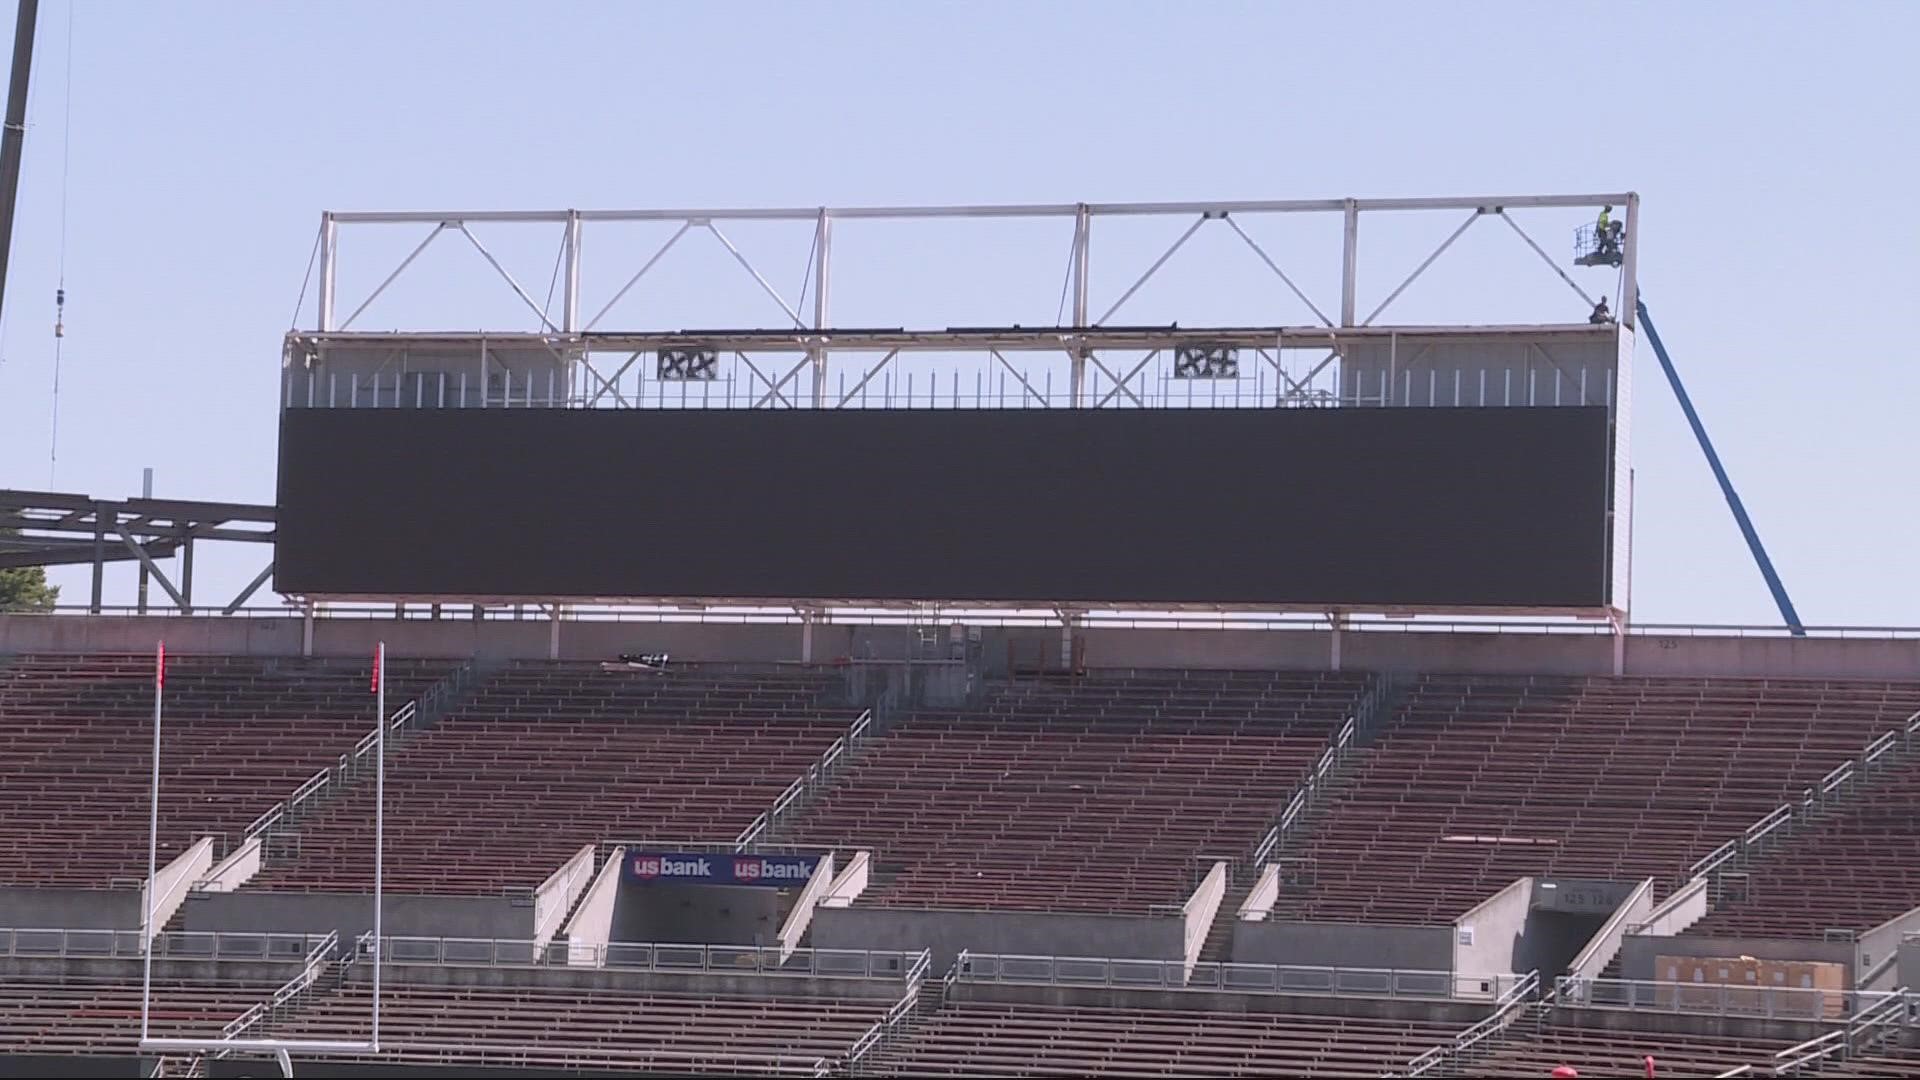 The $161 million project to rebuild the west side of the stadium is in full effect.